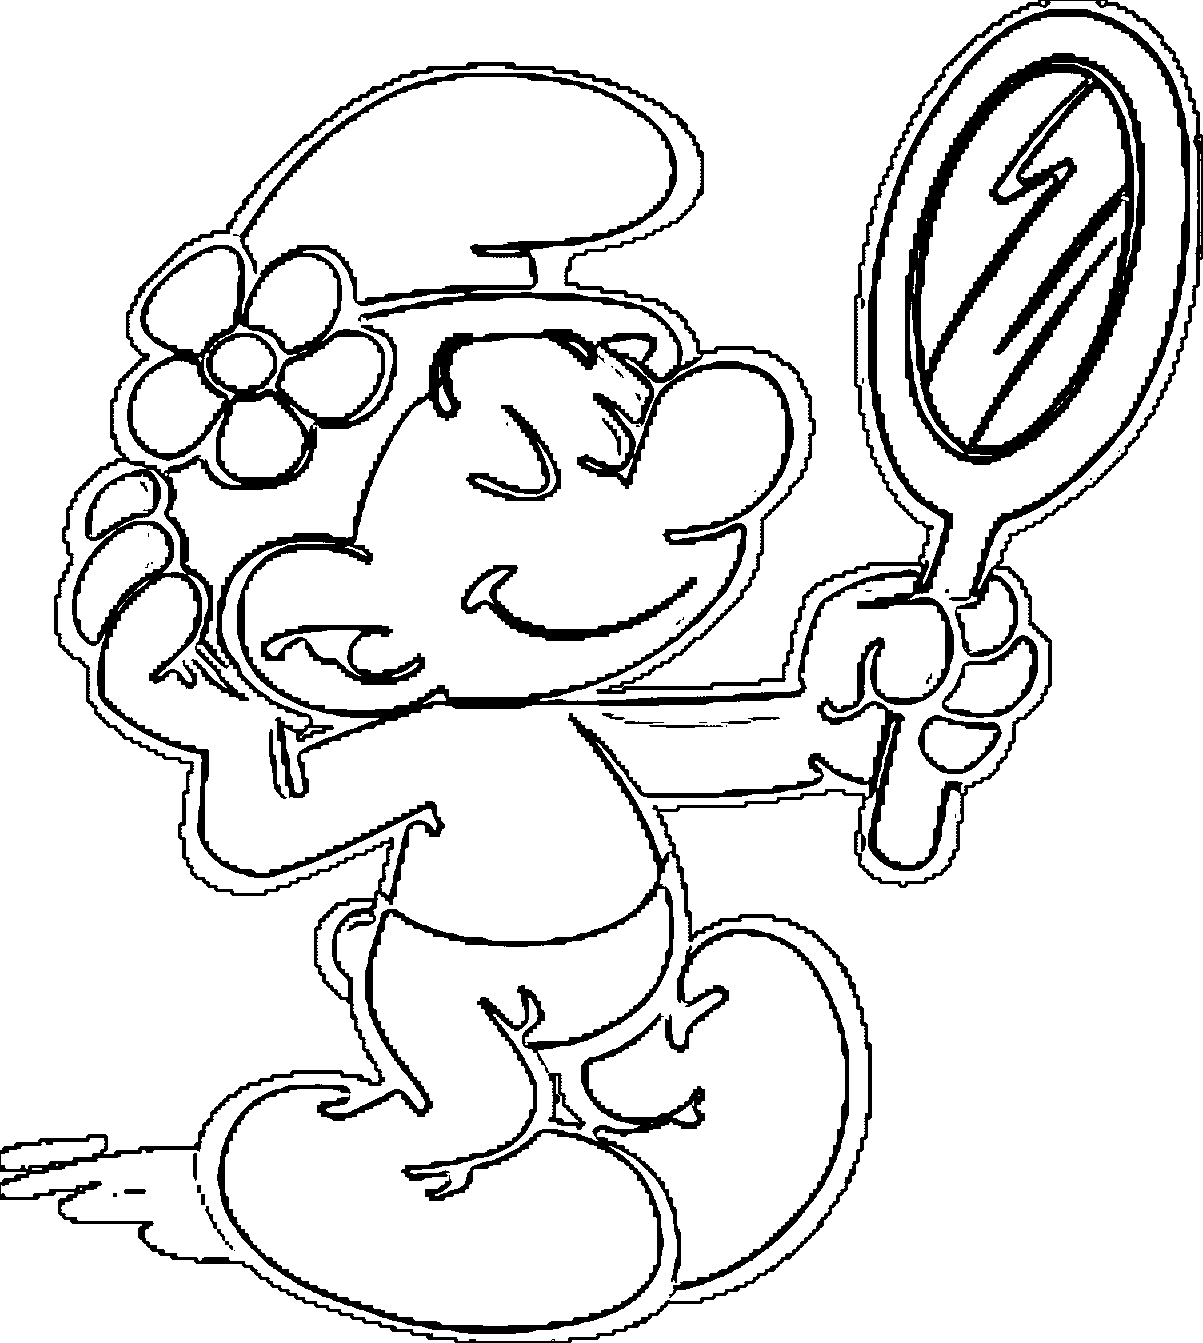 Smurf Christmas Coloring Pages - Coloring Home